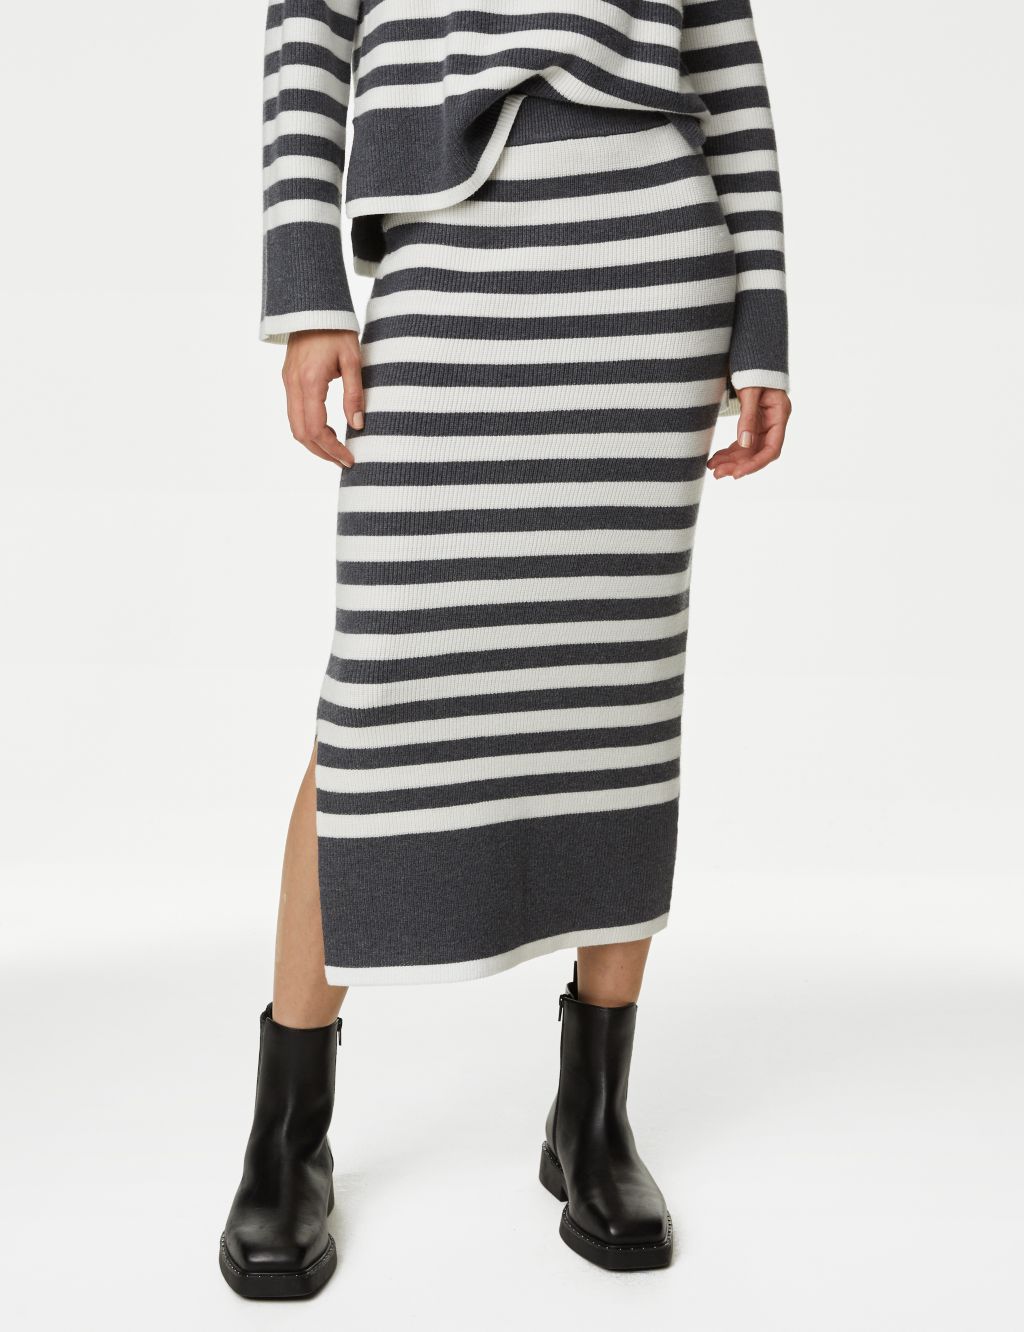 Striped Knitted Midi Skirt image 3